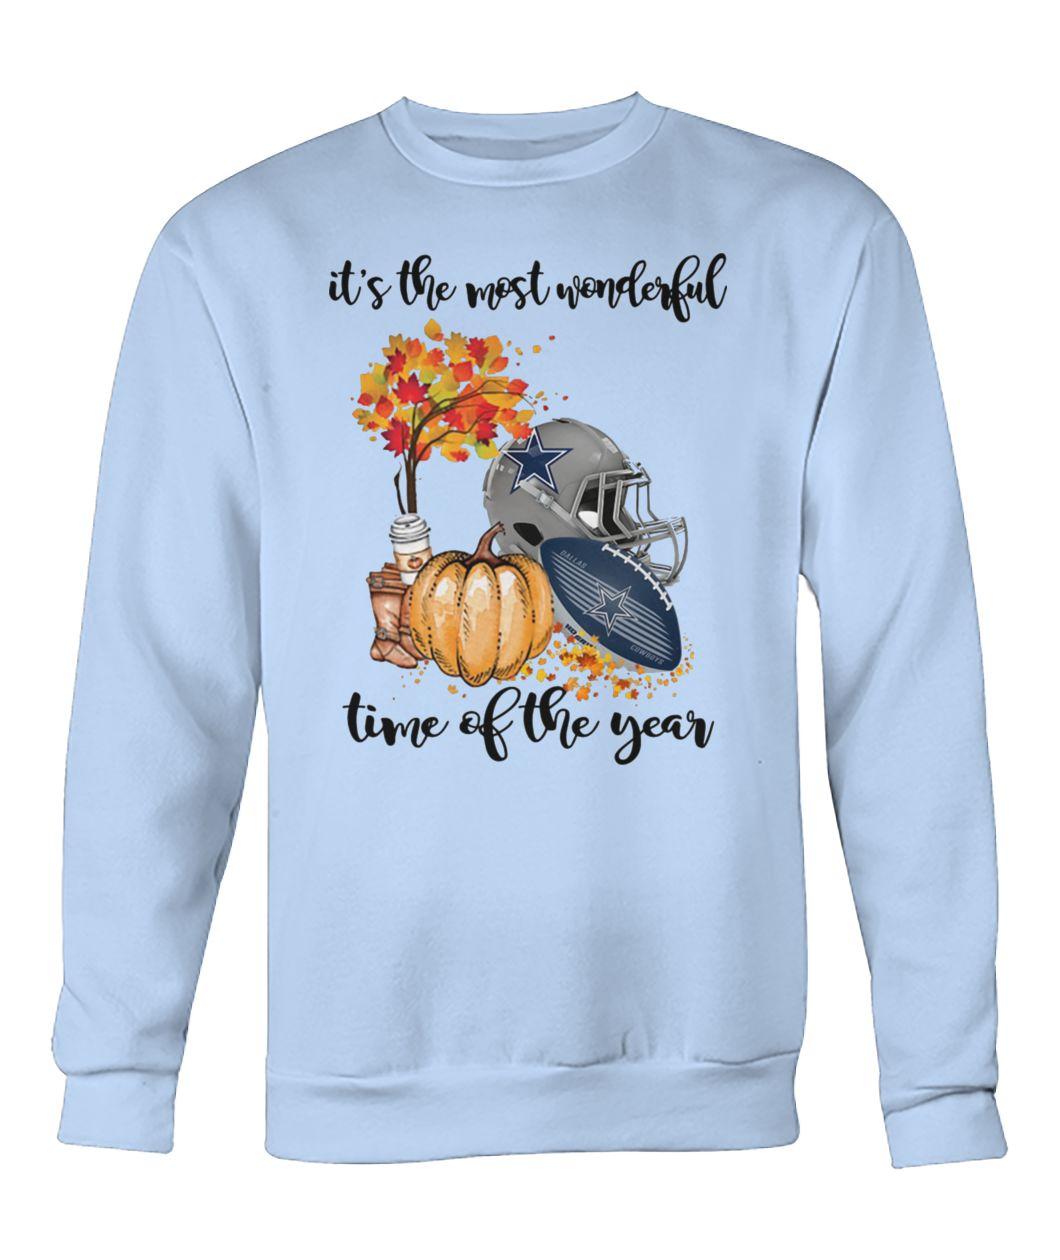 It’s the most wonderful time of the year dallas cowboys sweatshirt